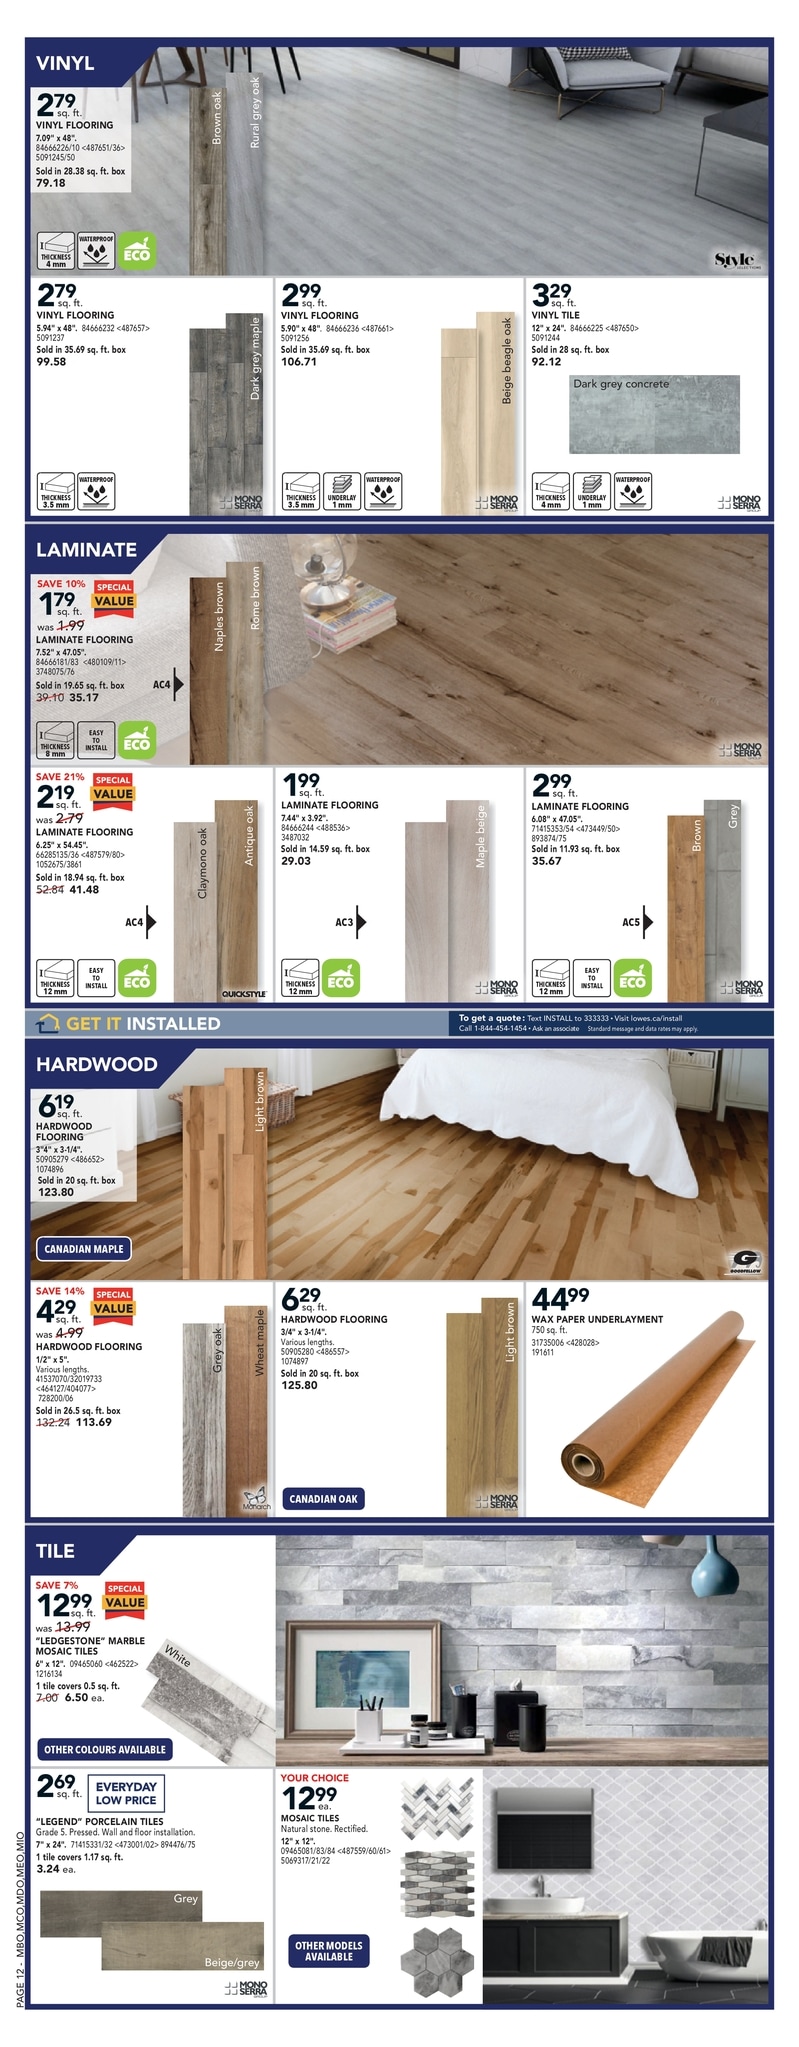 Lowe's - Weekly Flyer Specials - Page 13